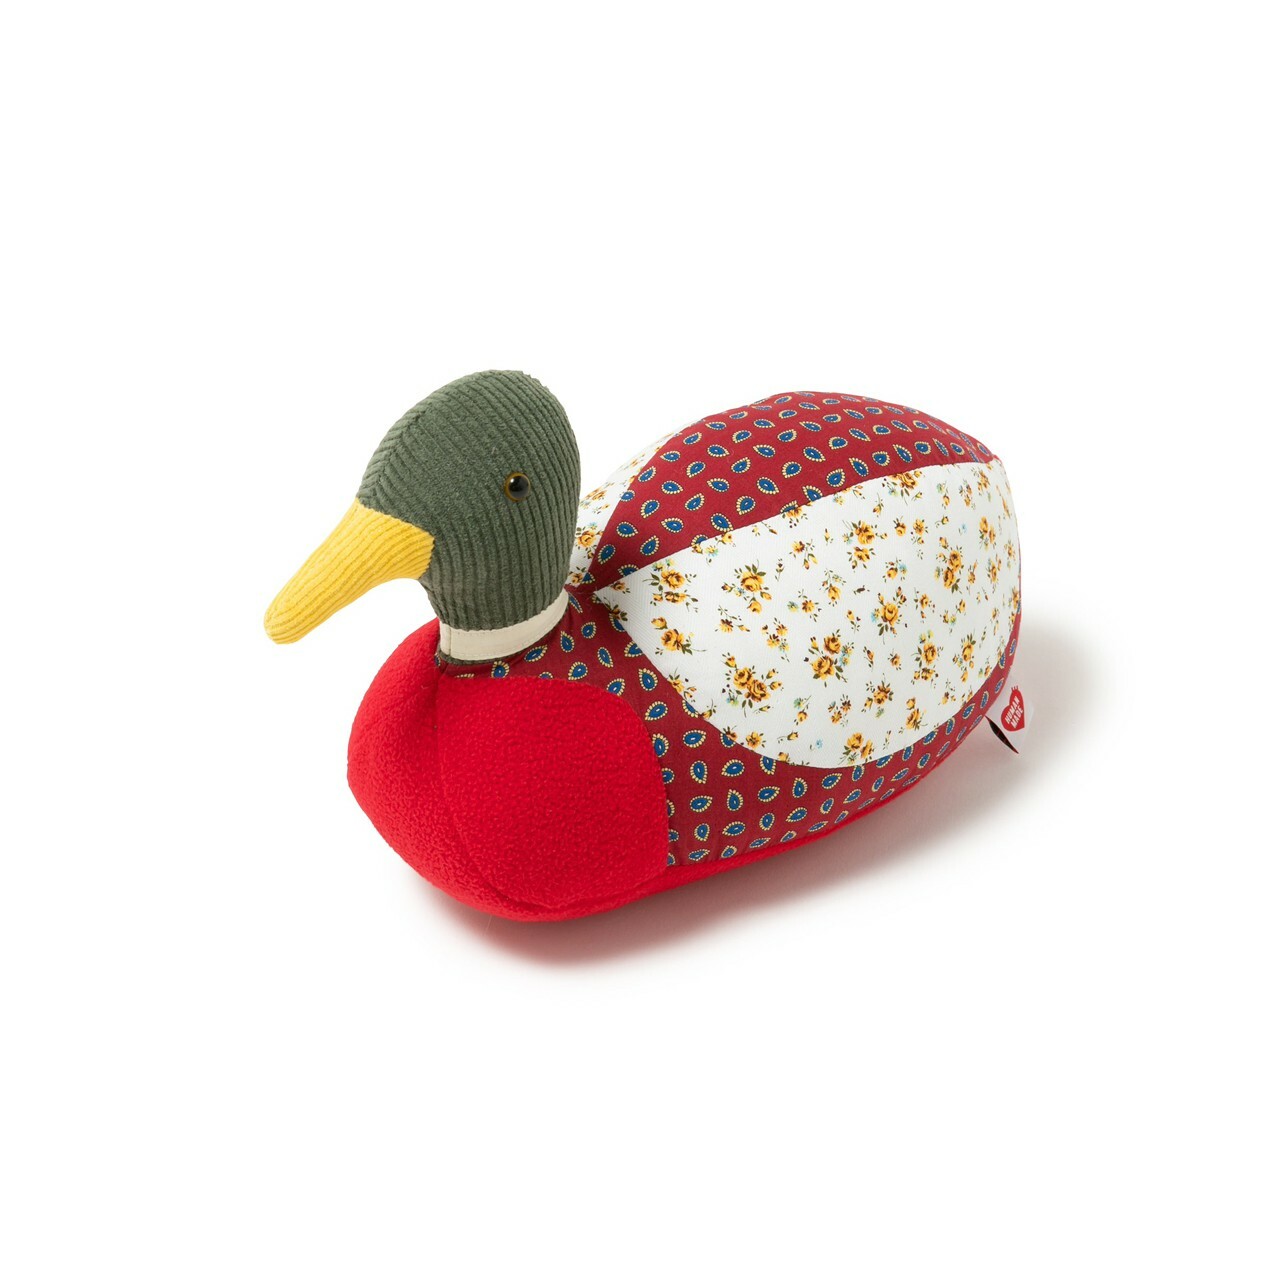 HUMAN MADE - PATCHWORK DUCK PLUSH DOLL